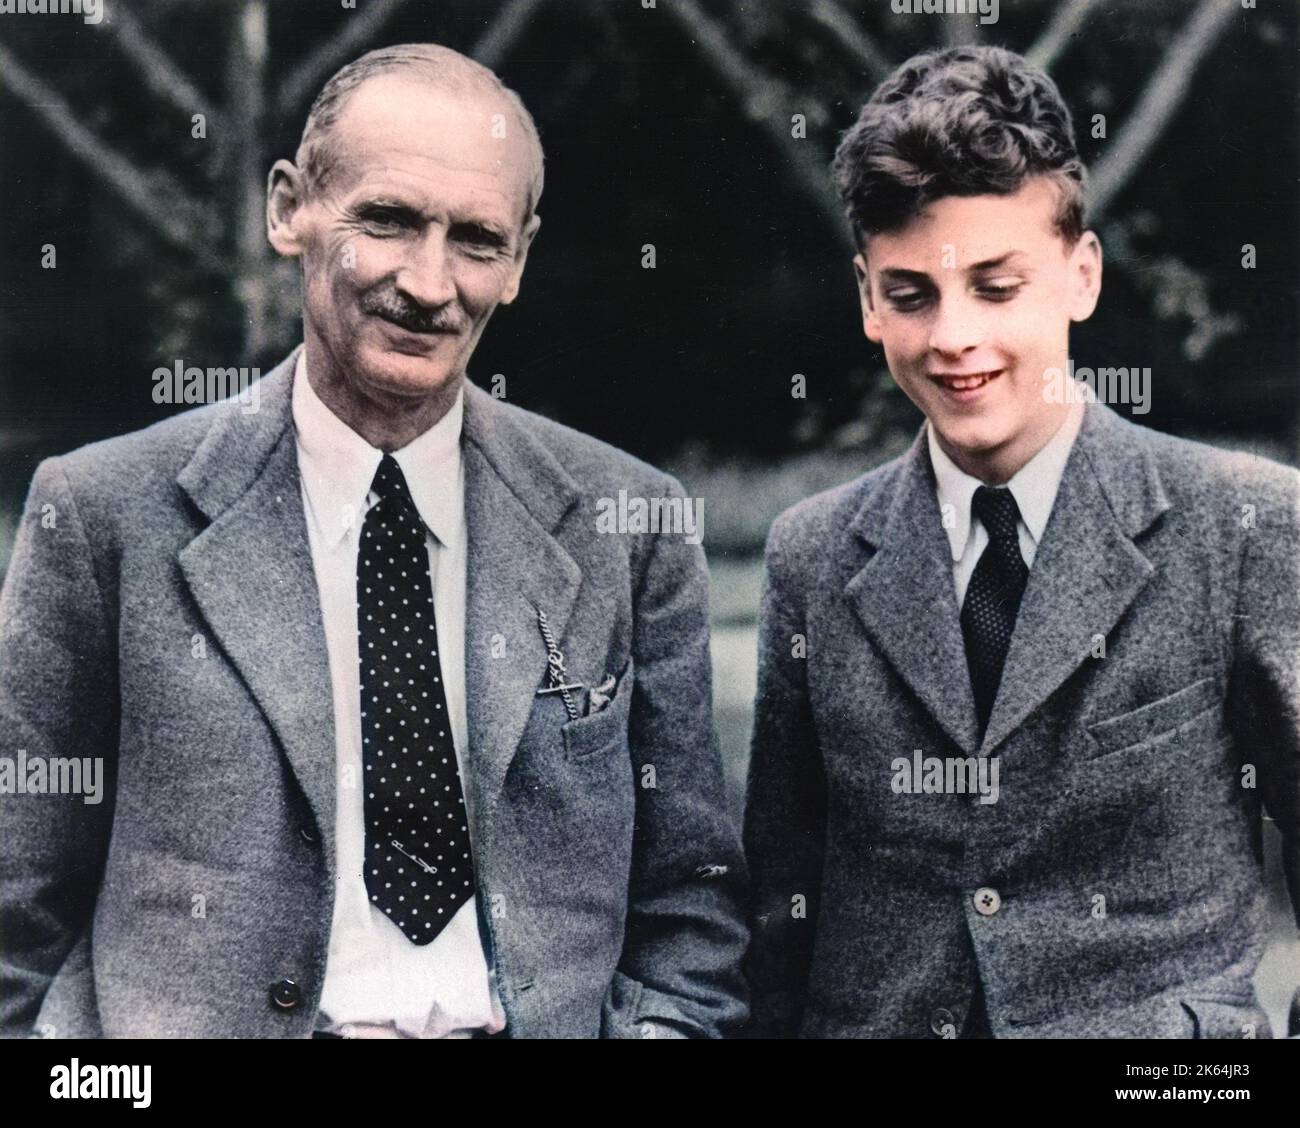 Bernard Law Montgomery, 1st Viscount Montgomery of Alamein (then just General Montgomery!) (1887-1976) visits his 15-year-old son David (David Montgomery, 2nd Viscount Montgomery of Alamein) (1928-) a pupil at  Amesbury School, nr. Hindhead, Surrey, England. Stock Photo